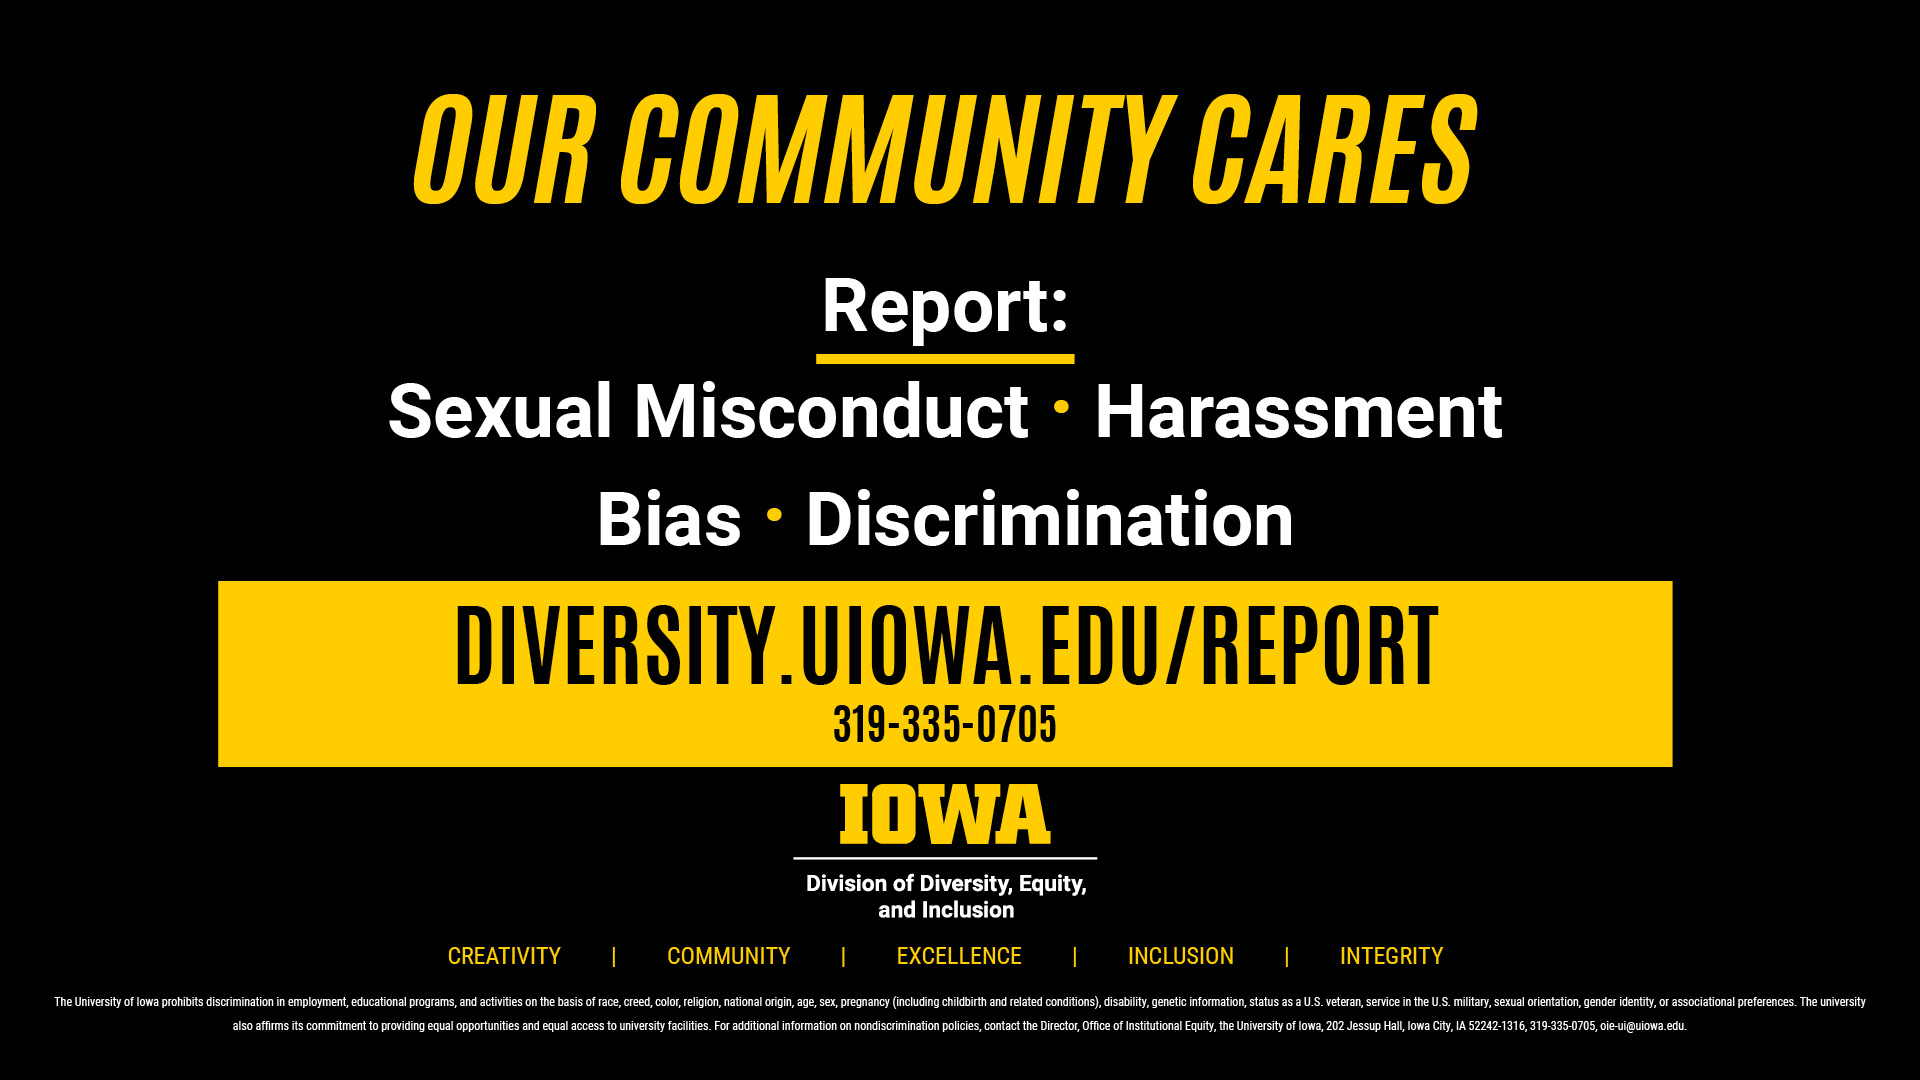 Our Community Cares - call 319-335-0705 to report sexual misconduct, harassment, bias, or discrimination